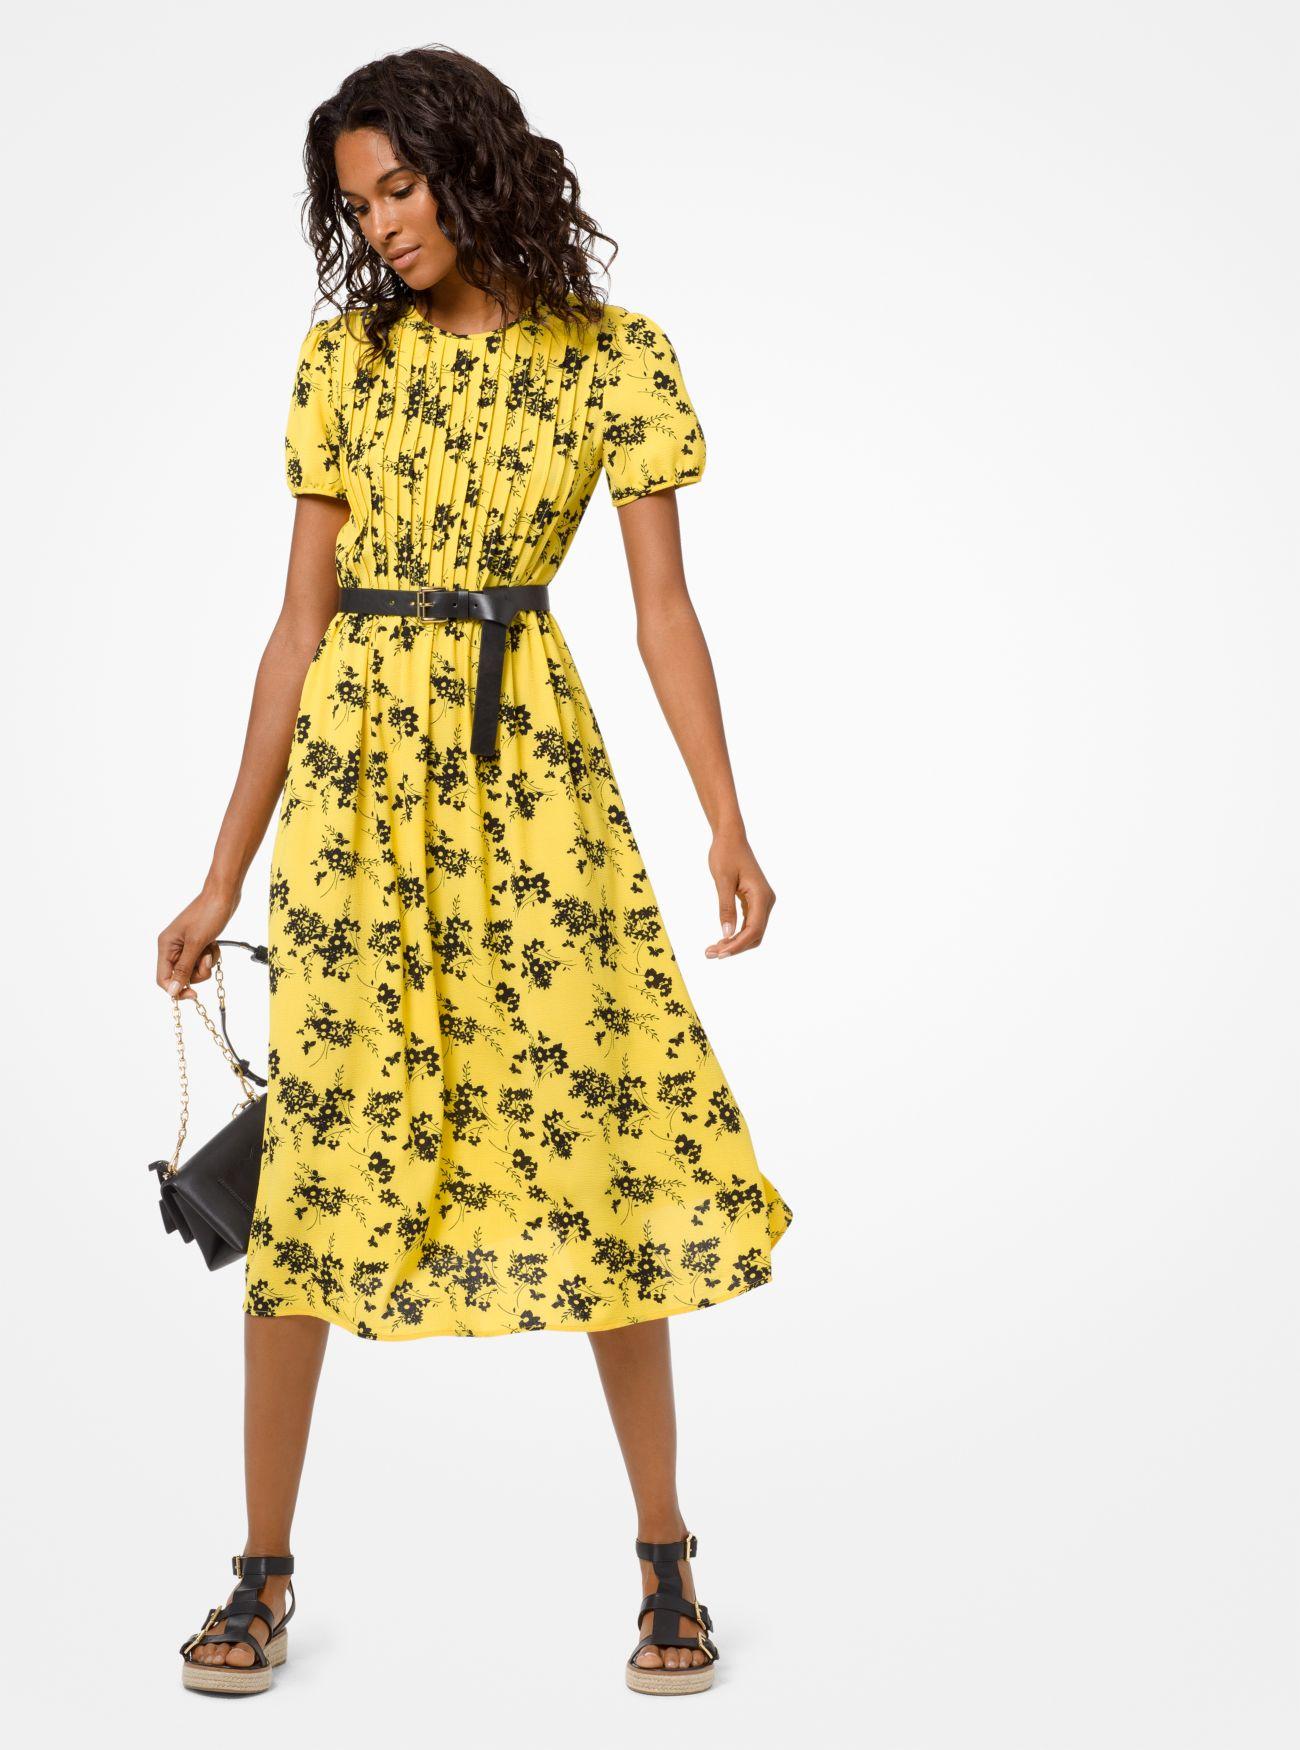 Michael Kors Synthetic Botanical Pintucked Dress in Golden Yellow/Black  (Yellow) | Lyst